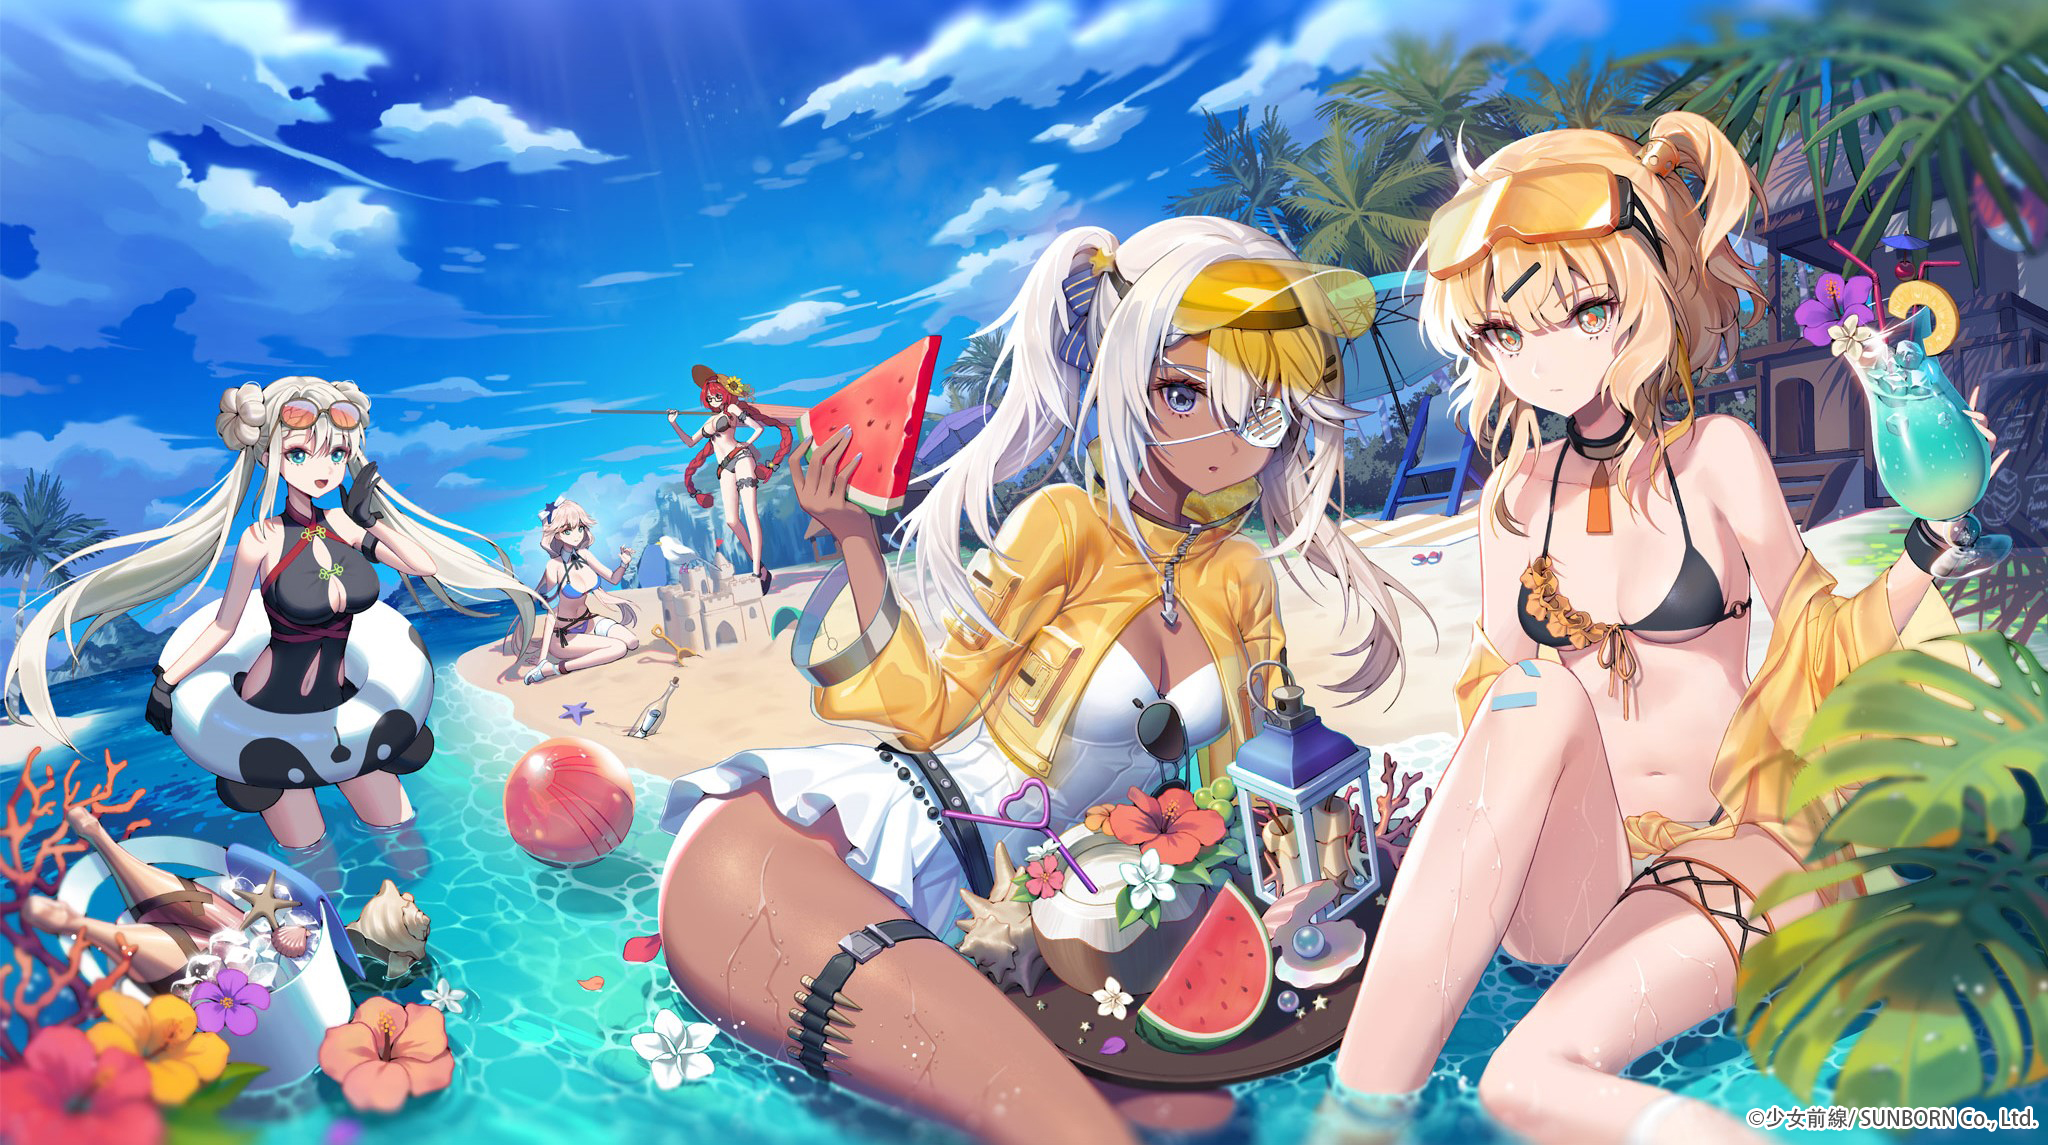 Anime 2048x1145 Lemonpear Girls Frontline anime girls watermelons beach group of women boobs cleavage water swimwear bikini one-piece swimsuit food drink flowers hibiscus wet body wet beach ball seashells alcohol long hair sand castle legs floater petals leaves palm trees plants bottles sky clouds looking at viewer twintails hairbun braids choker coral reef women on beach fruit women outdoors eyepatches